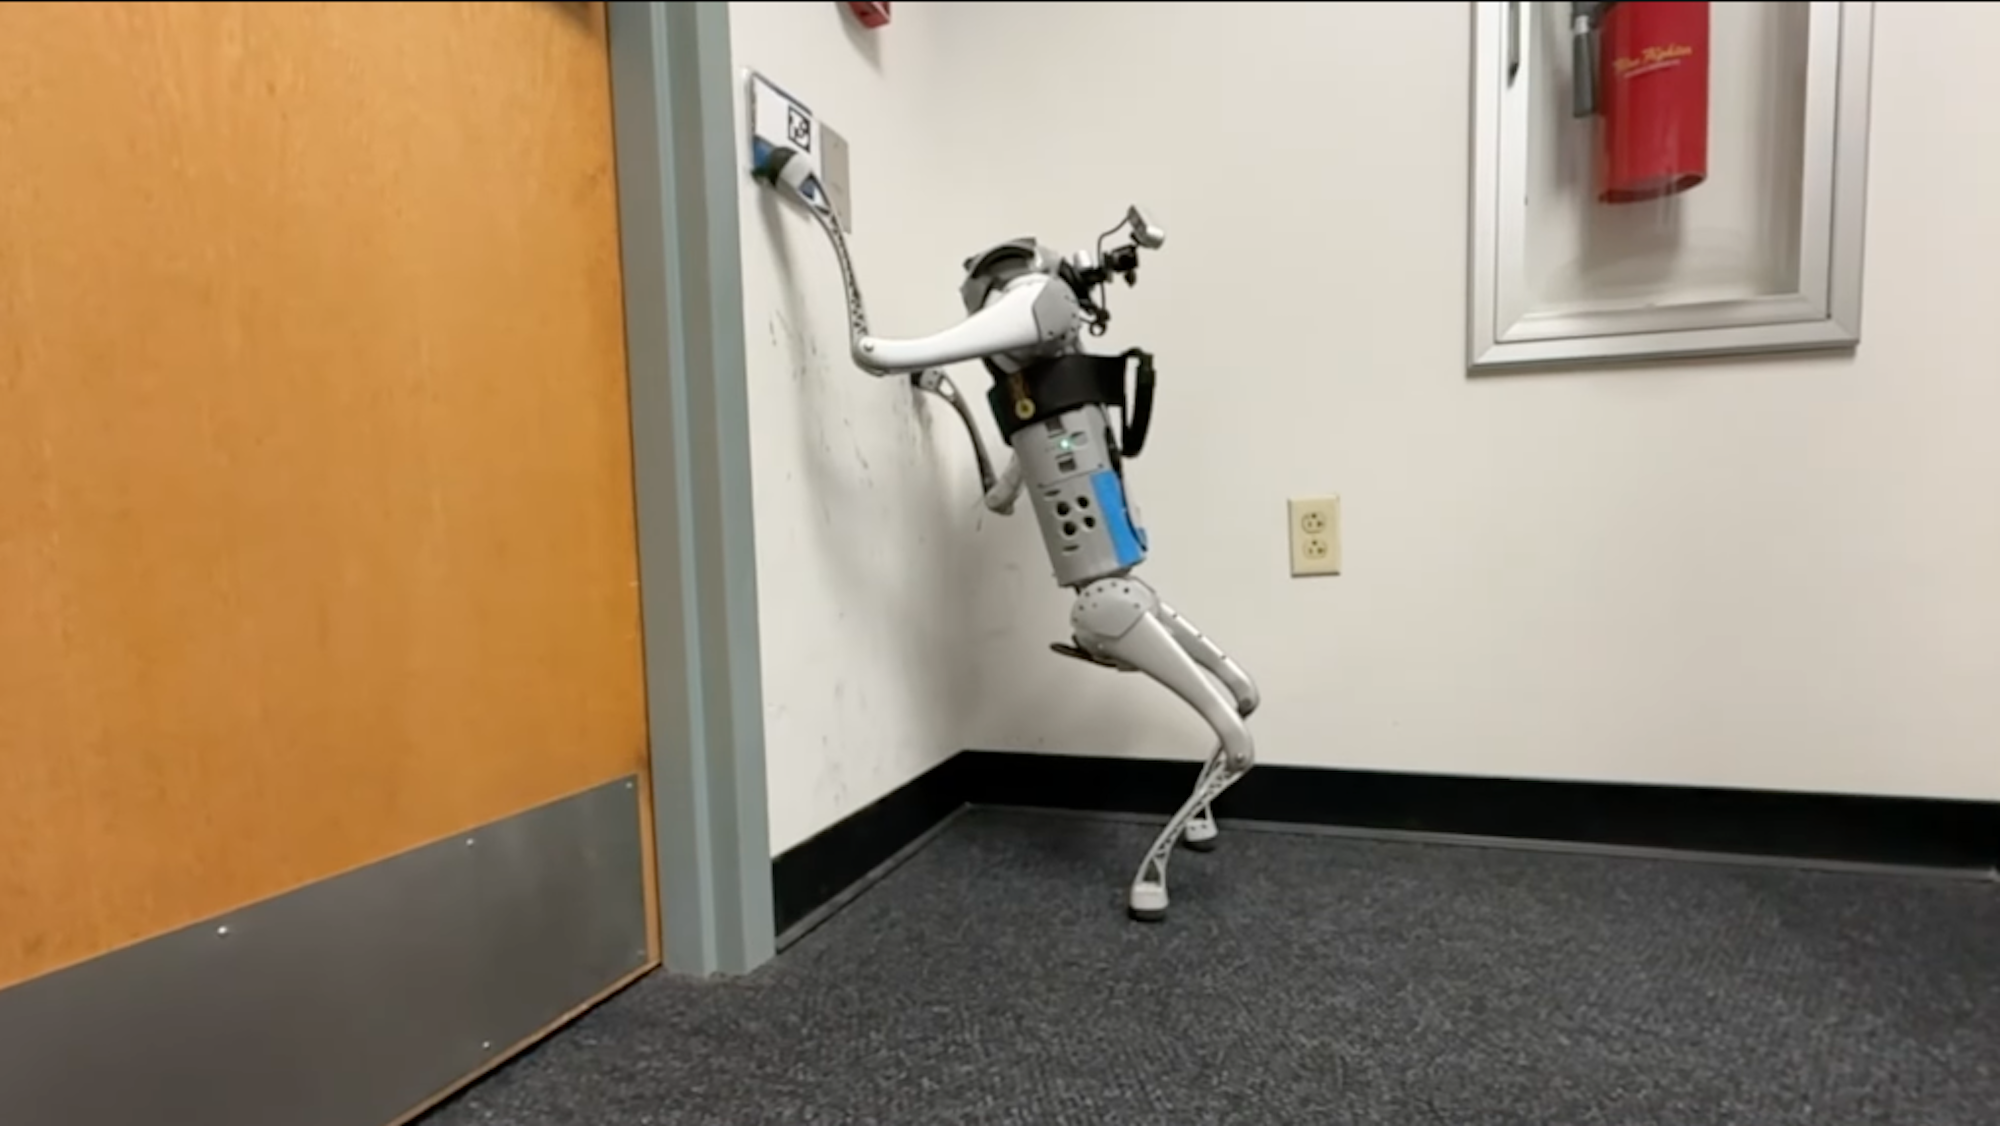 It's surprisingly difficult to get robots to use their legs for walking and object interaction.